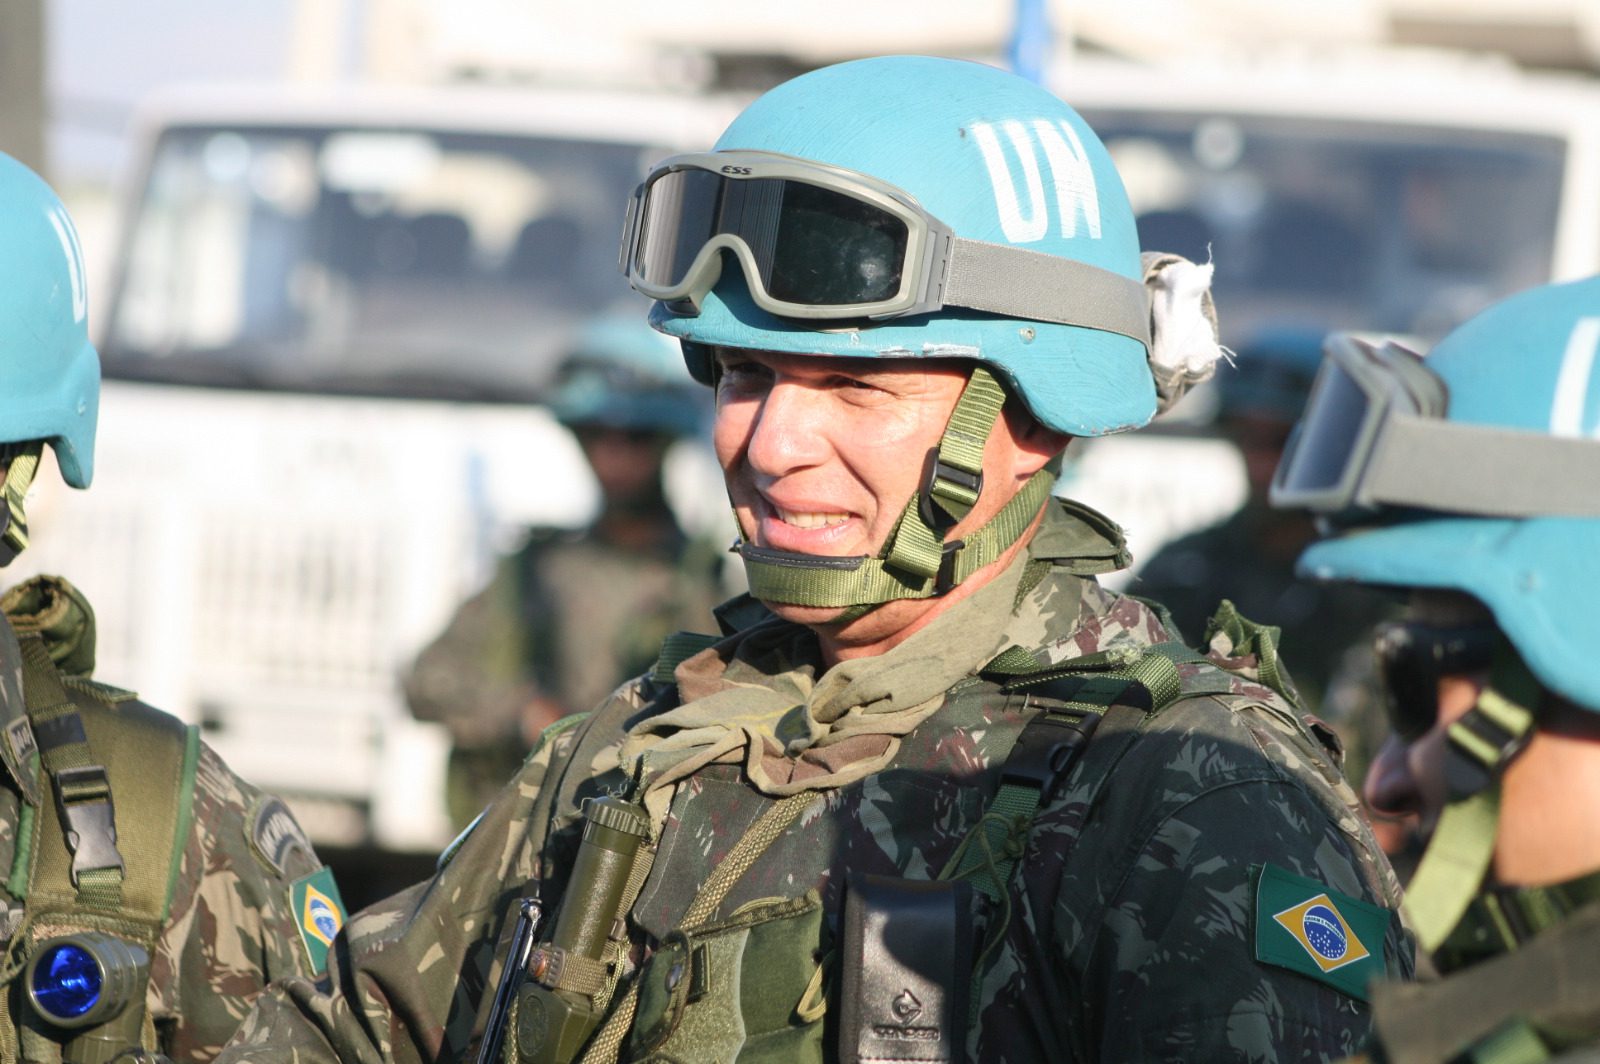 Haiti: how a Brazilian Army soldier saved himself and others in the 2010 earthquake